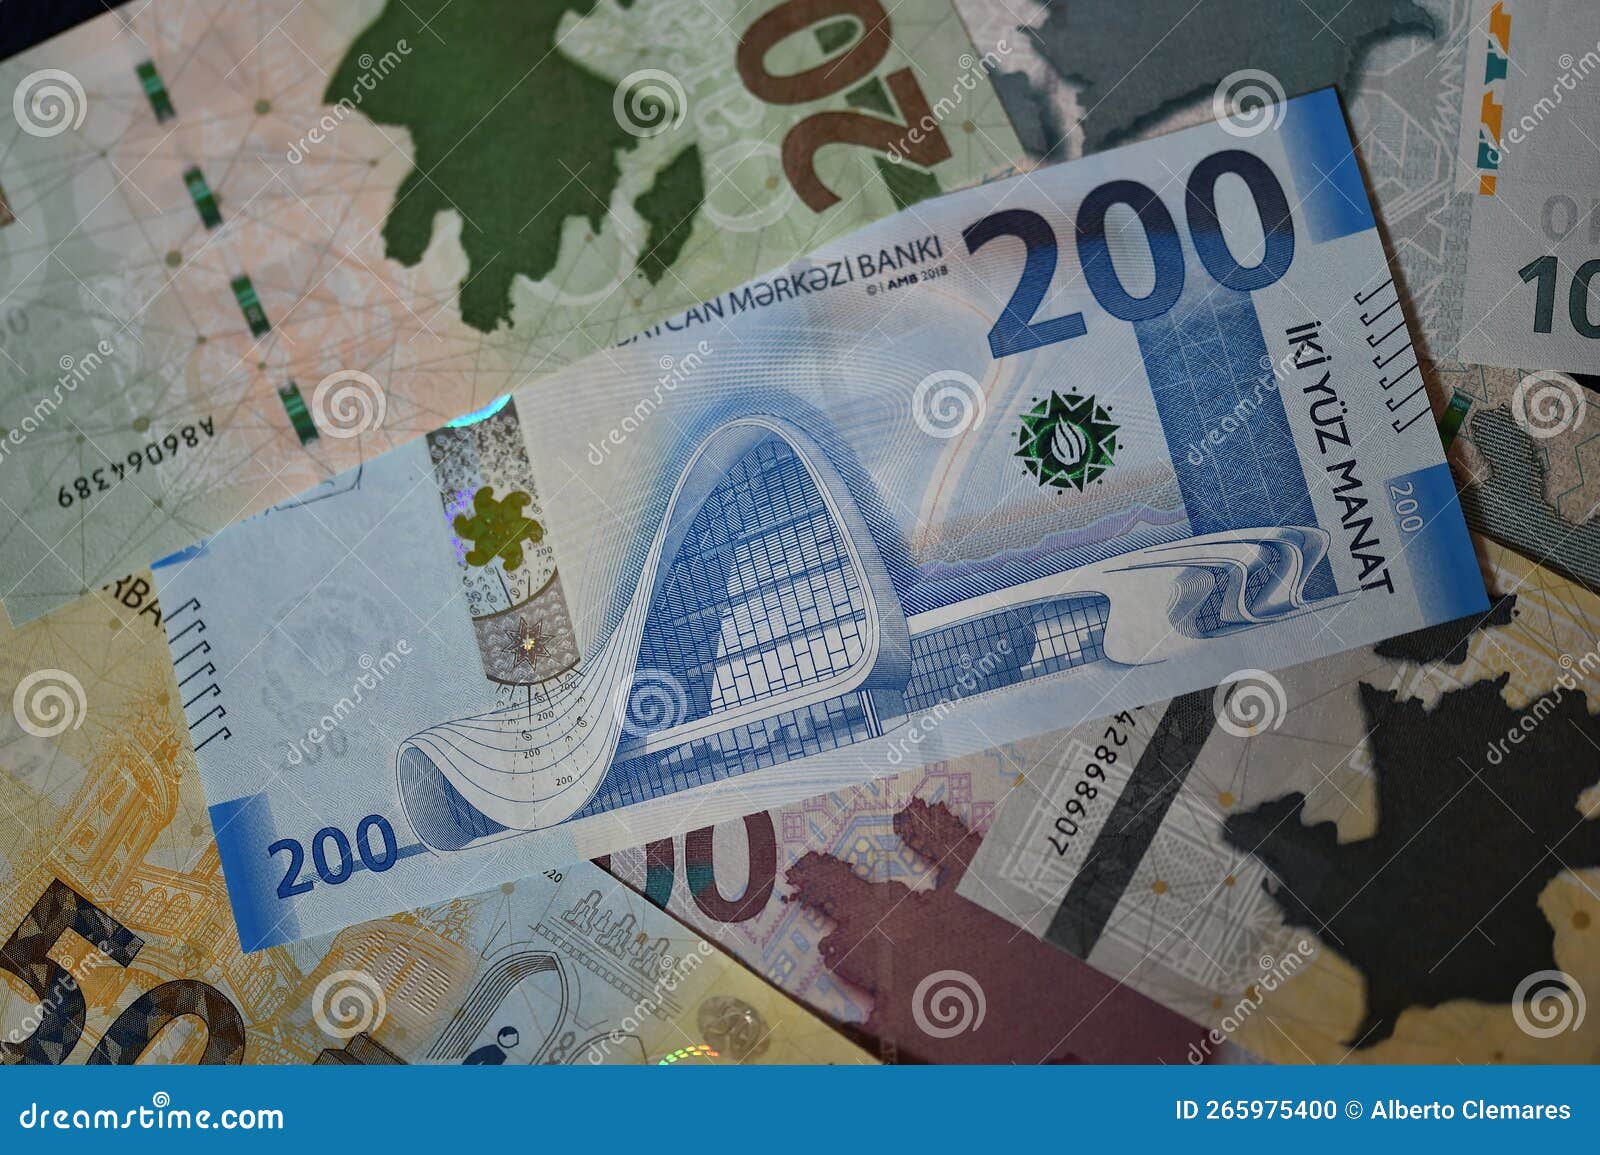 some current banknotes of azerbaijan